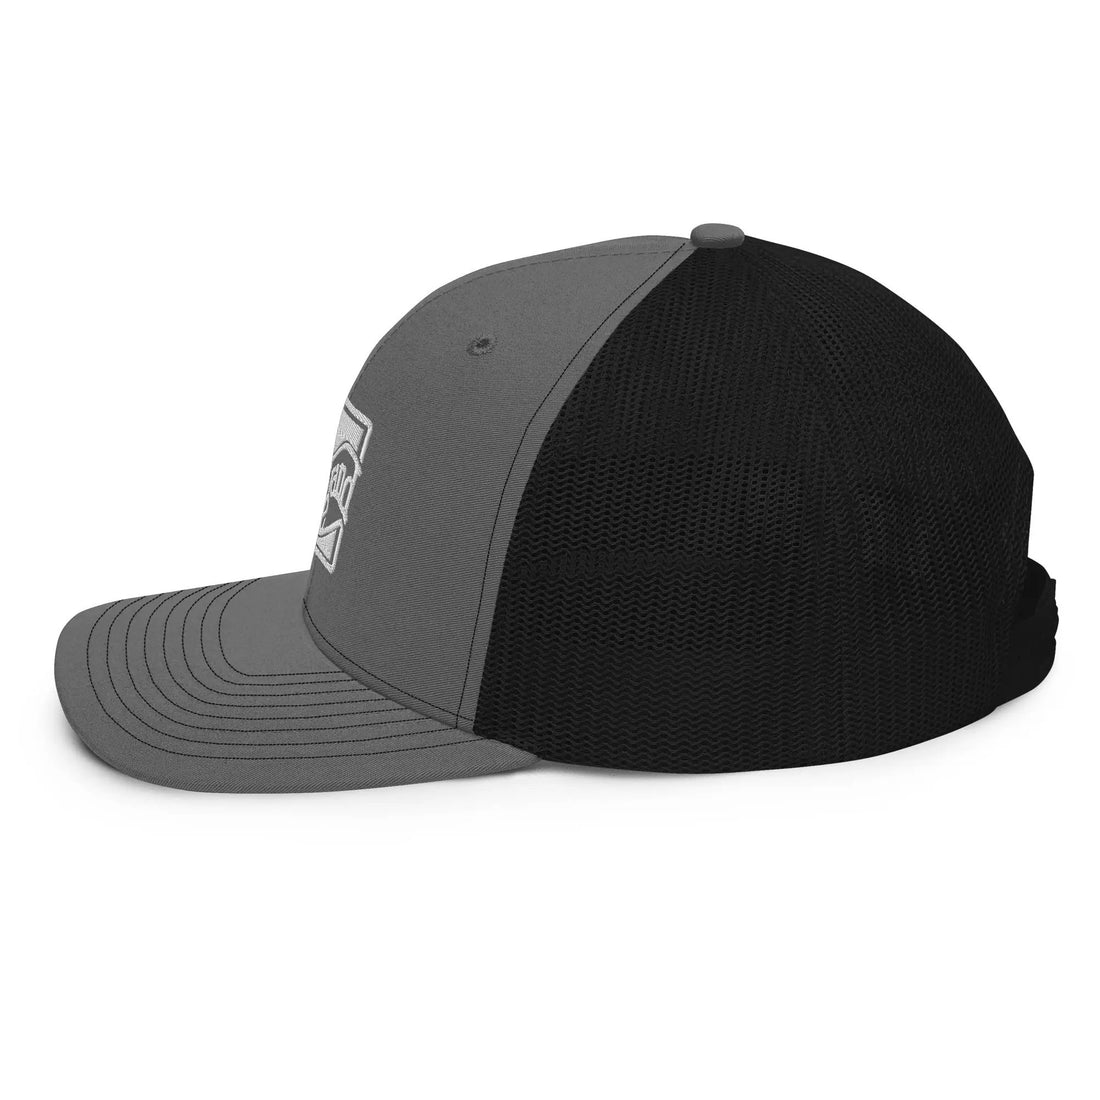 a black and grey hat with a white patch on the side